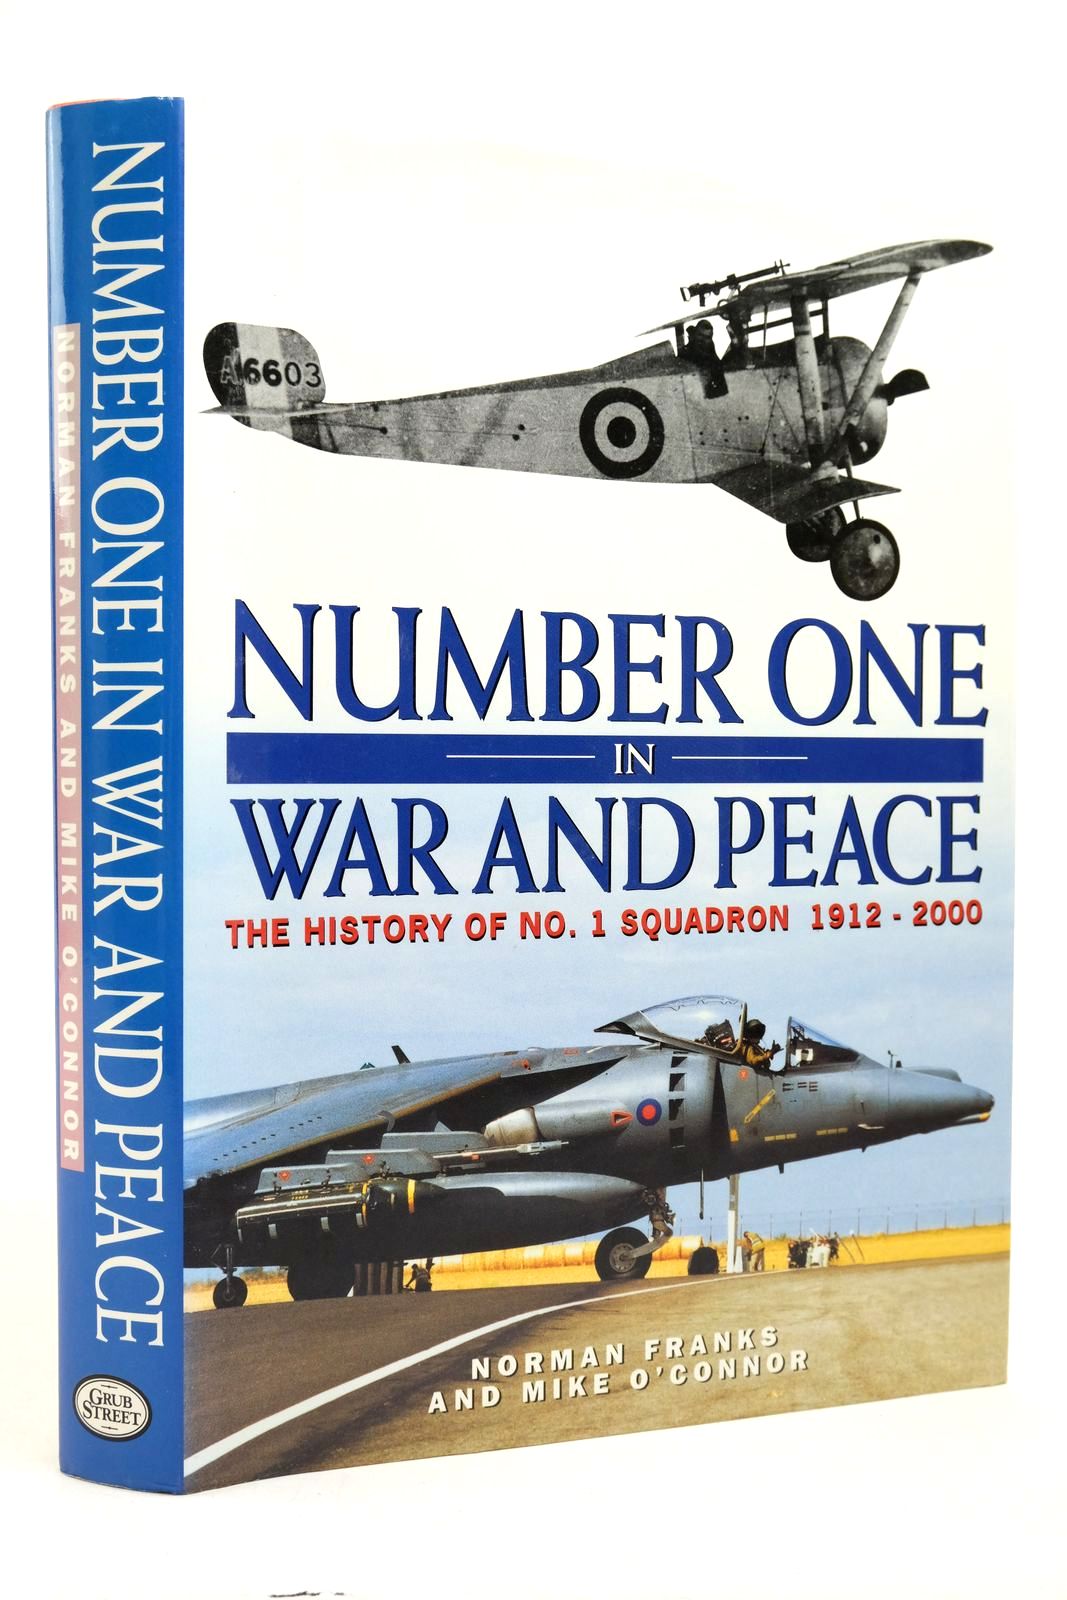 Photo of NUMBER ONE IN WAR AND PEACE: THE HISTORY OF No. 1 SQUADRON 1912-2000 written by Franks, Norman O'Connor, Mike published by Grub Street (STOCK CODE: 2139820)  for sale by Stella & Rose's Books